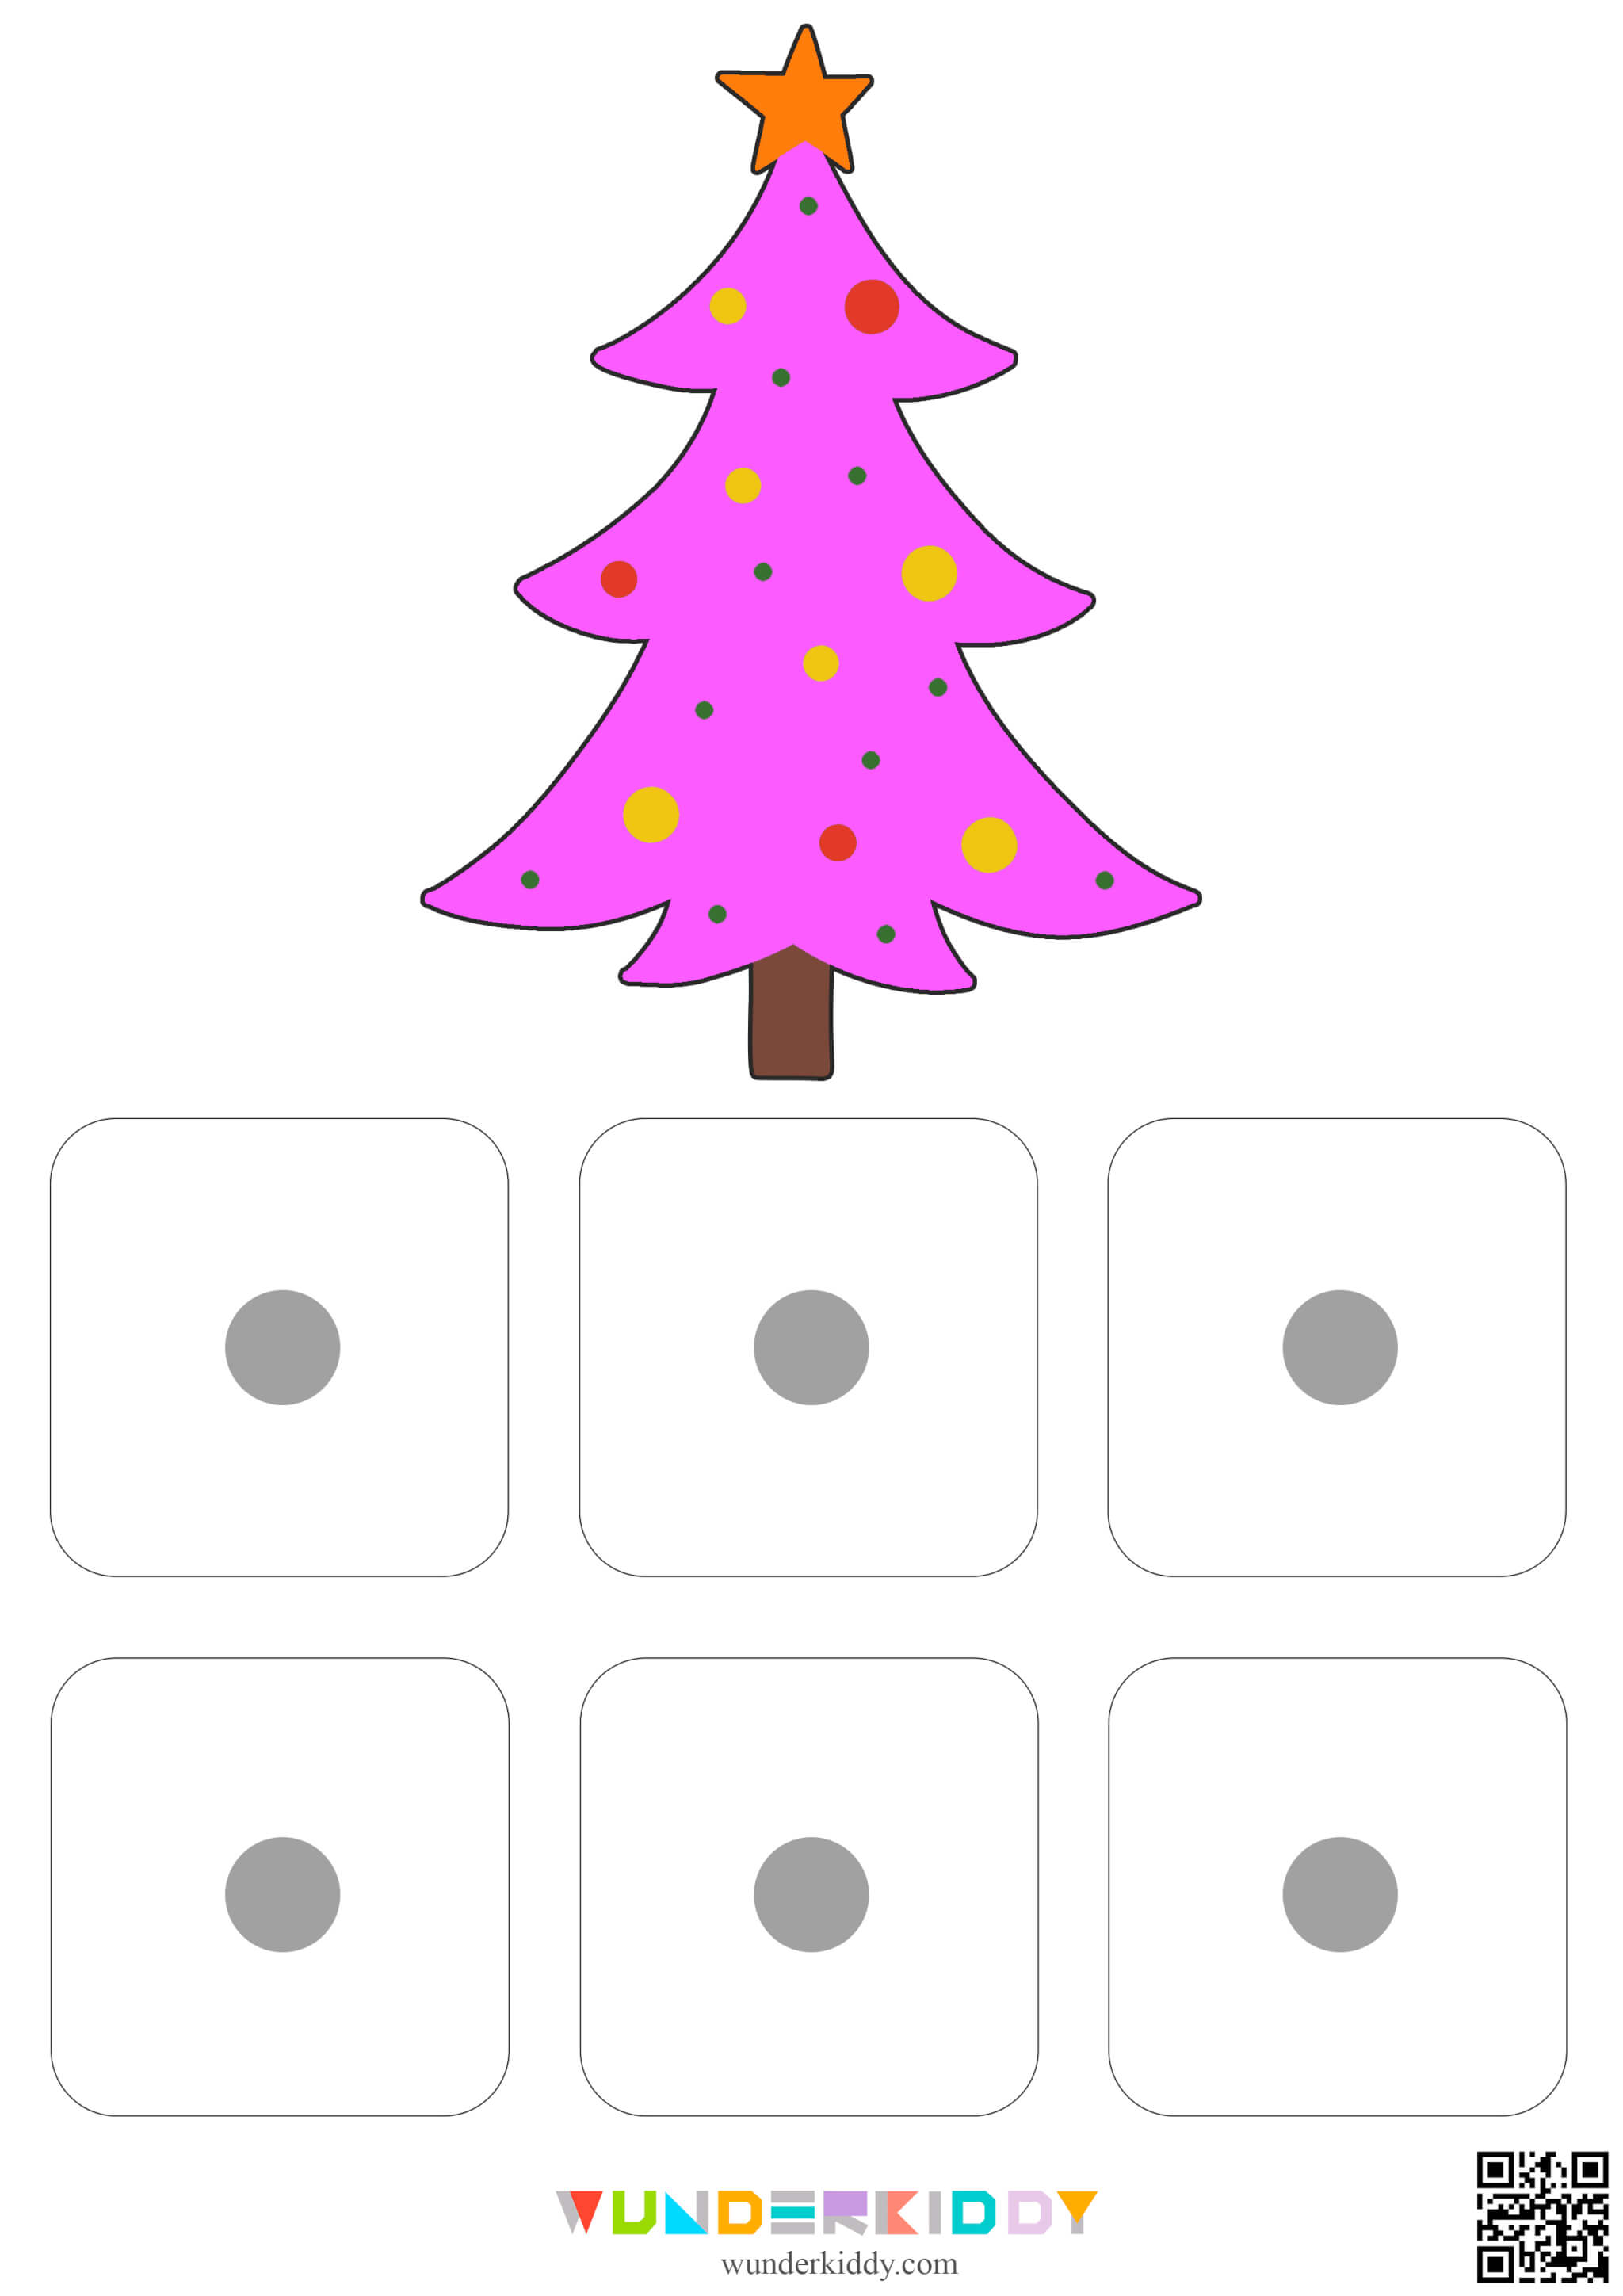 Christmas Color Sorting Activity - Image 6